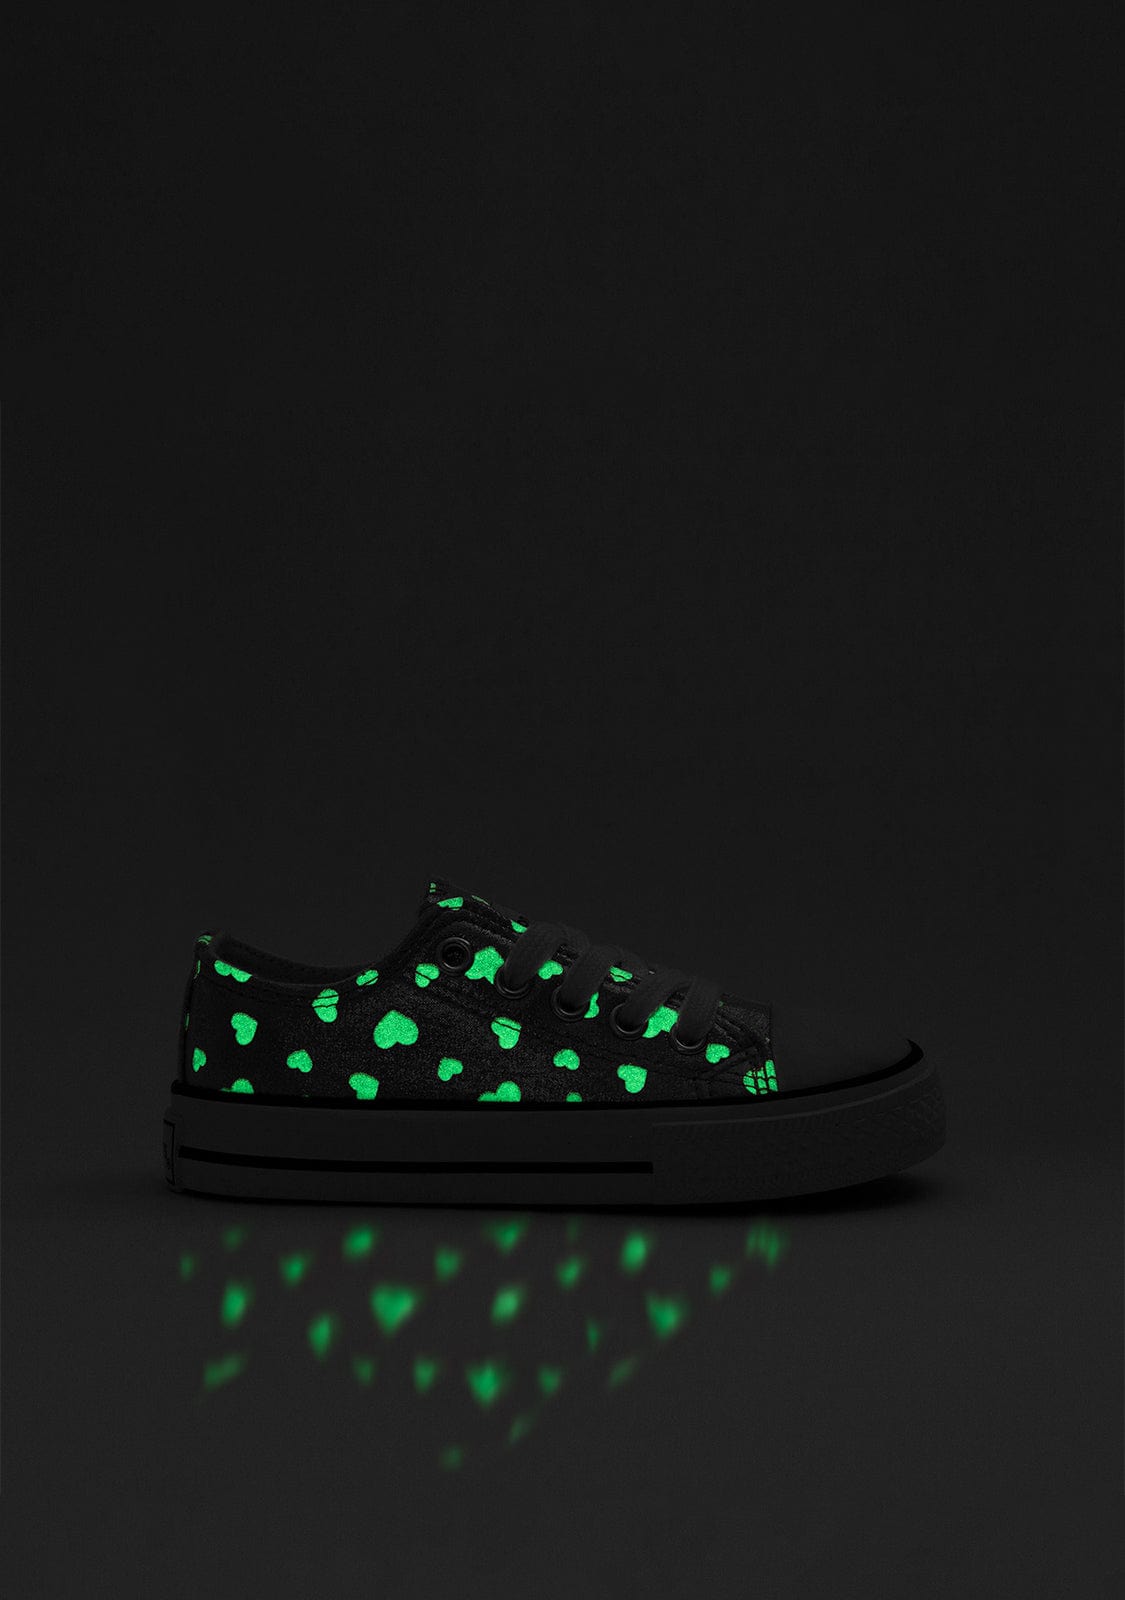 CONGUITOS Shoes Girl's Silver Glows in the Dark Sneakers